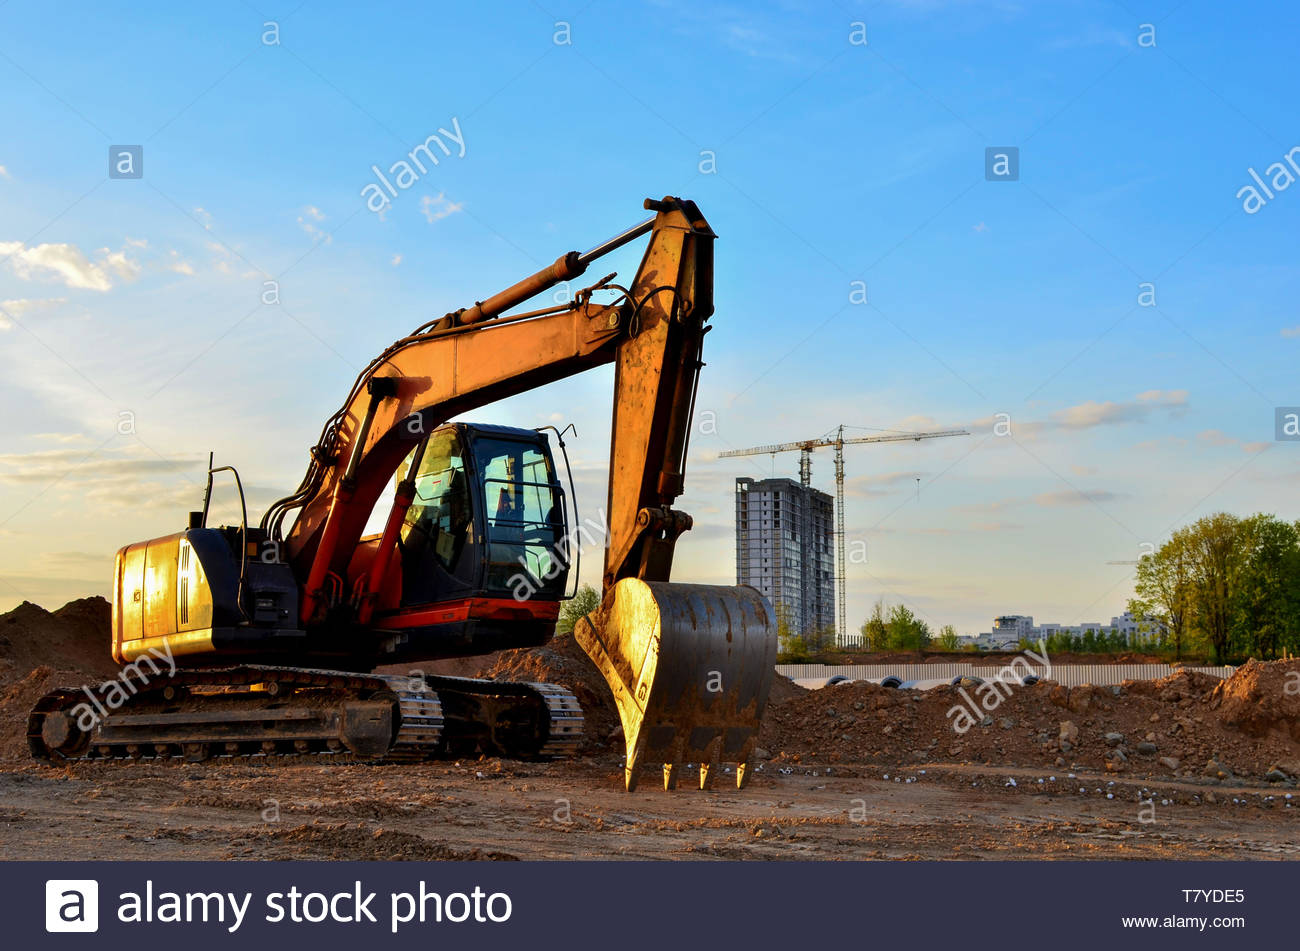 Heavy Tracked Excavator At A Construction Site On Background Of